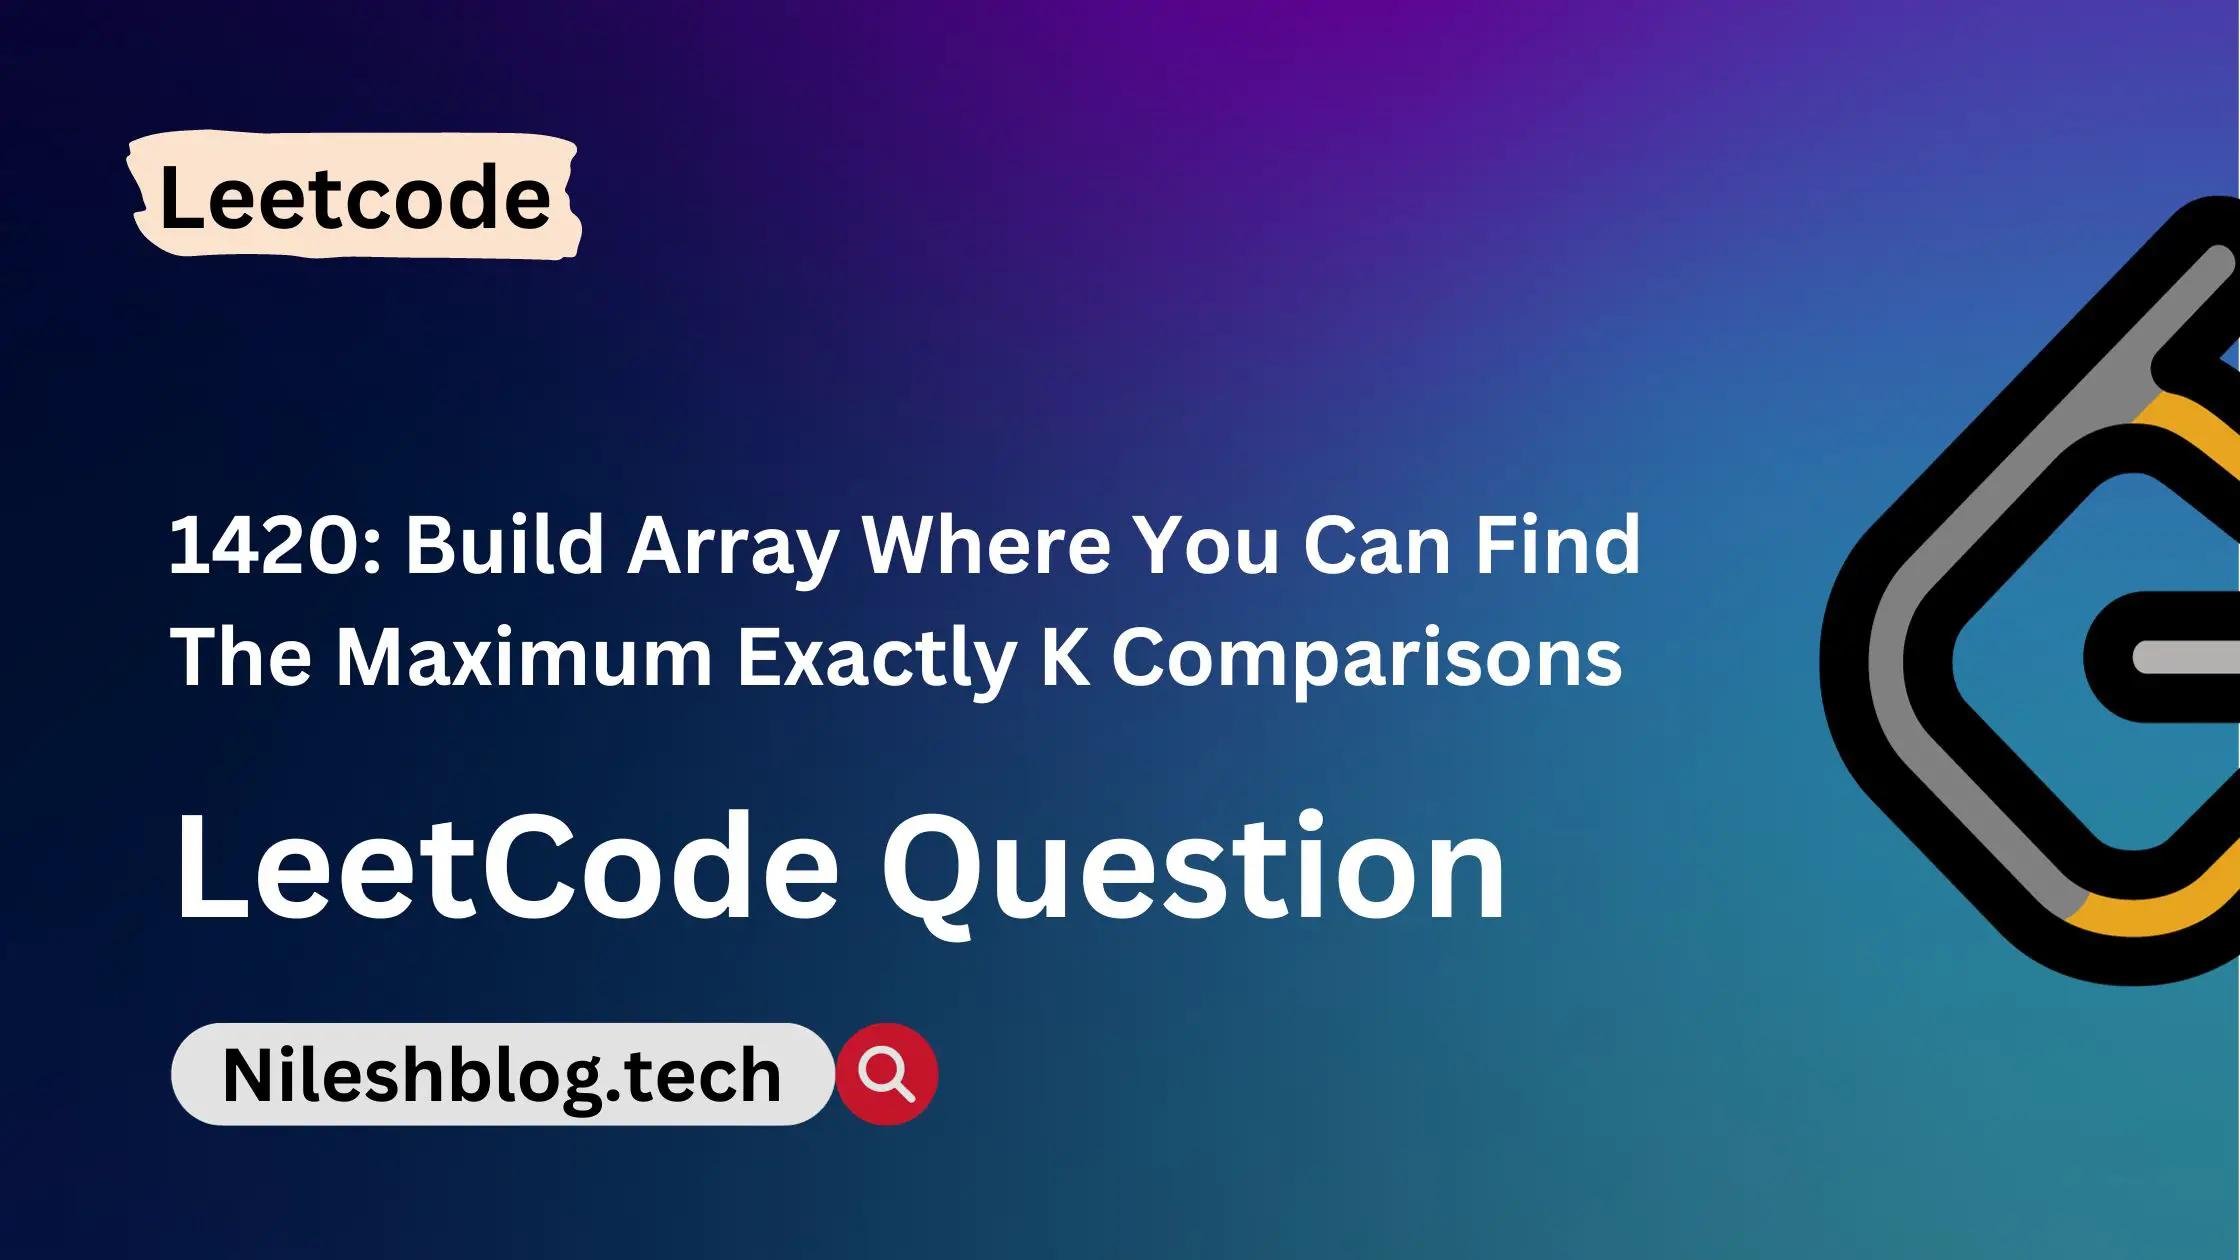 LeetCode 1420: Build Array Where You Can Find The Maximum Exactly K Comparisons